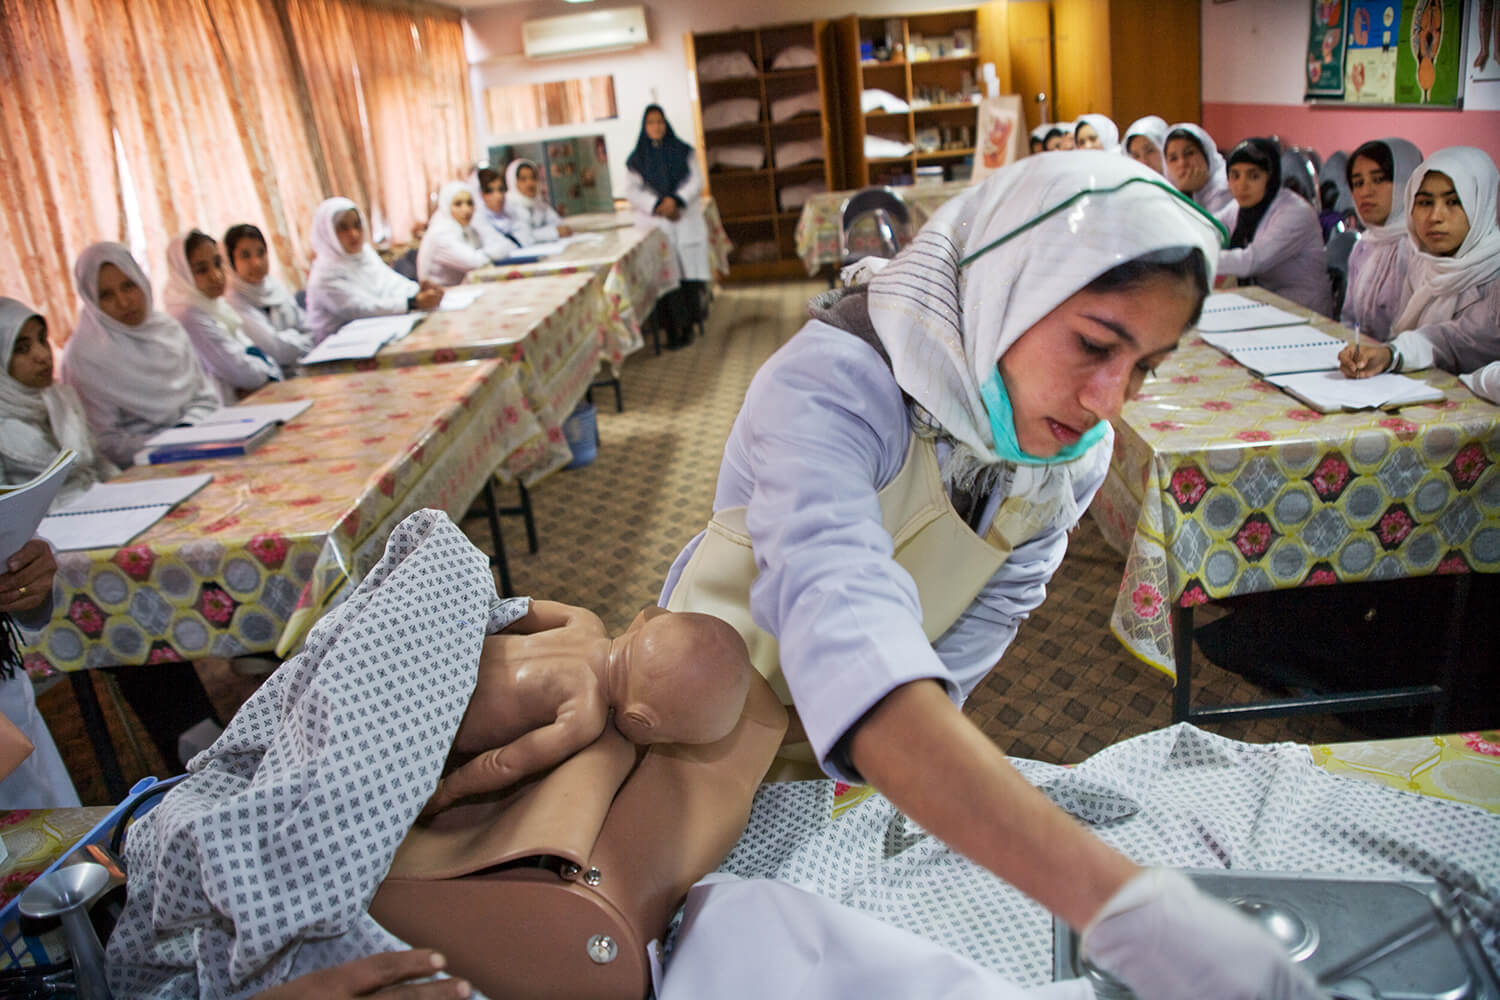  Afghanistan. Midwifery at the institute of Health Science Midwifery Programme in Kabul. 